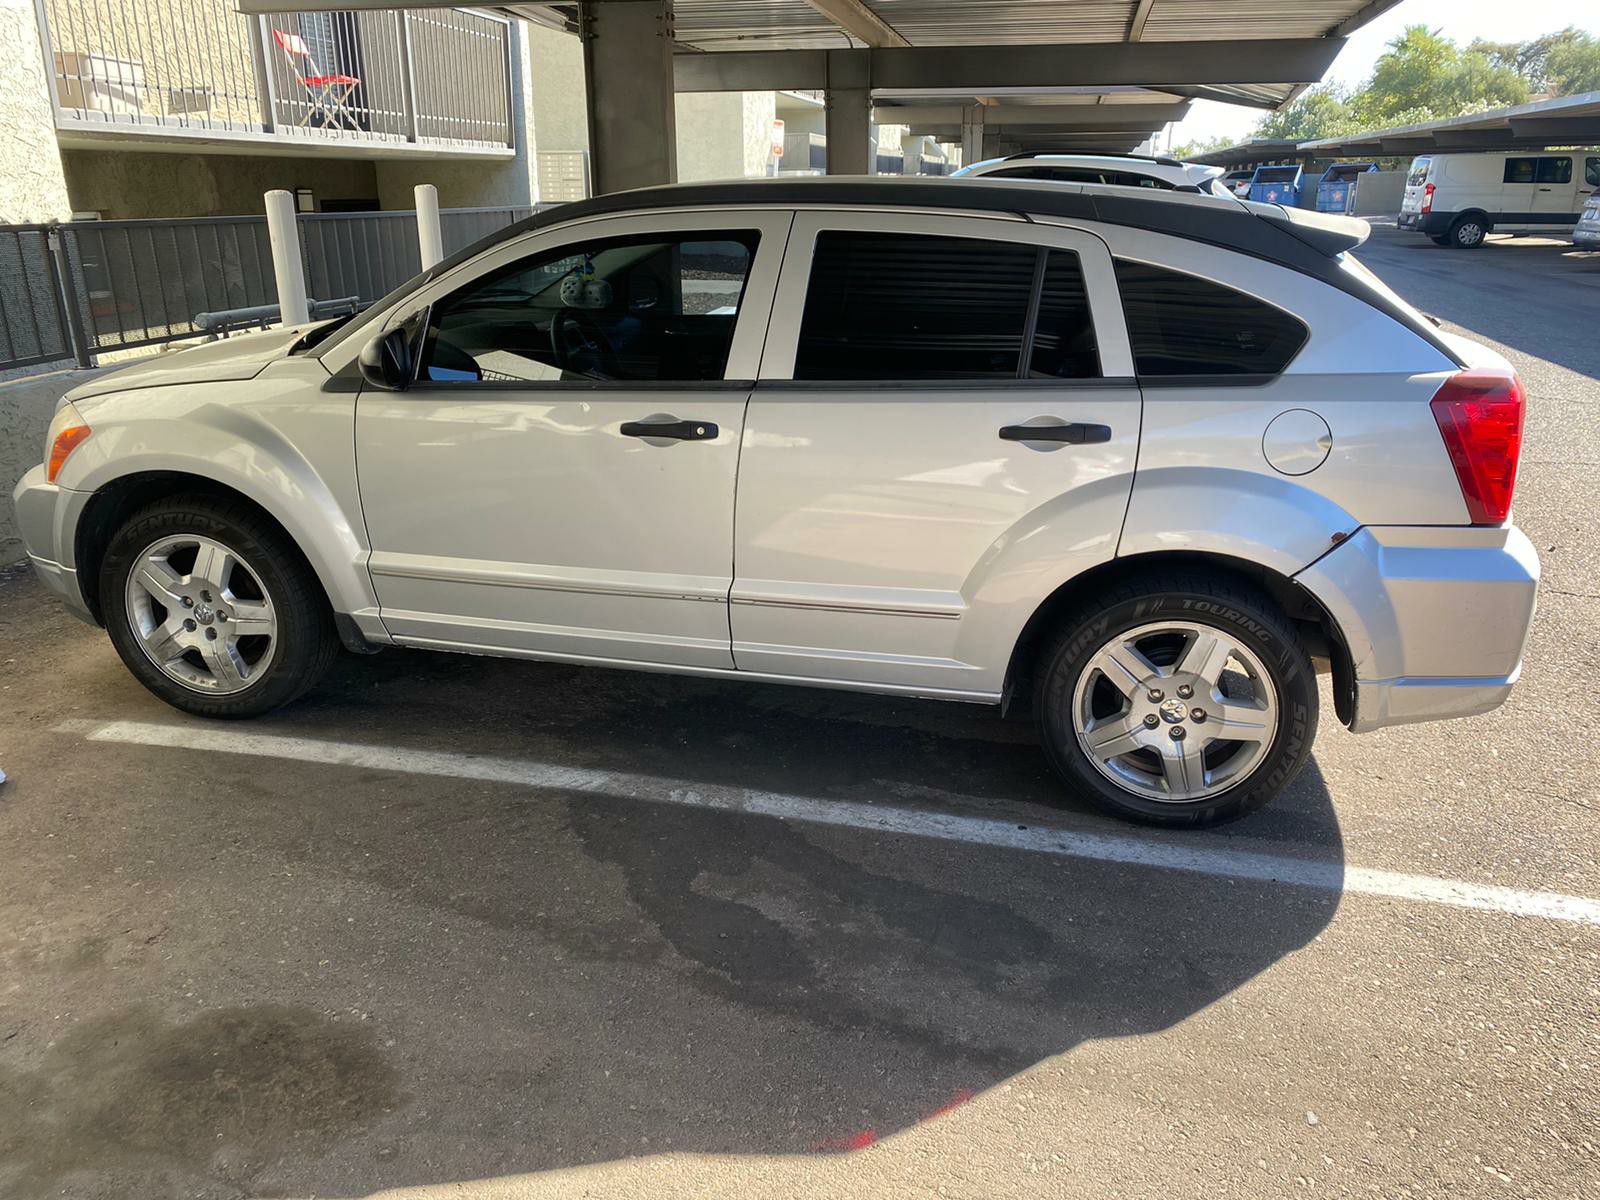 Dodge caliber 2008 2.0 SXT Does not want to turn on. Give me a offer. Clean title. No quiere encender. Deme una oferta. Título limpio